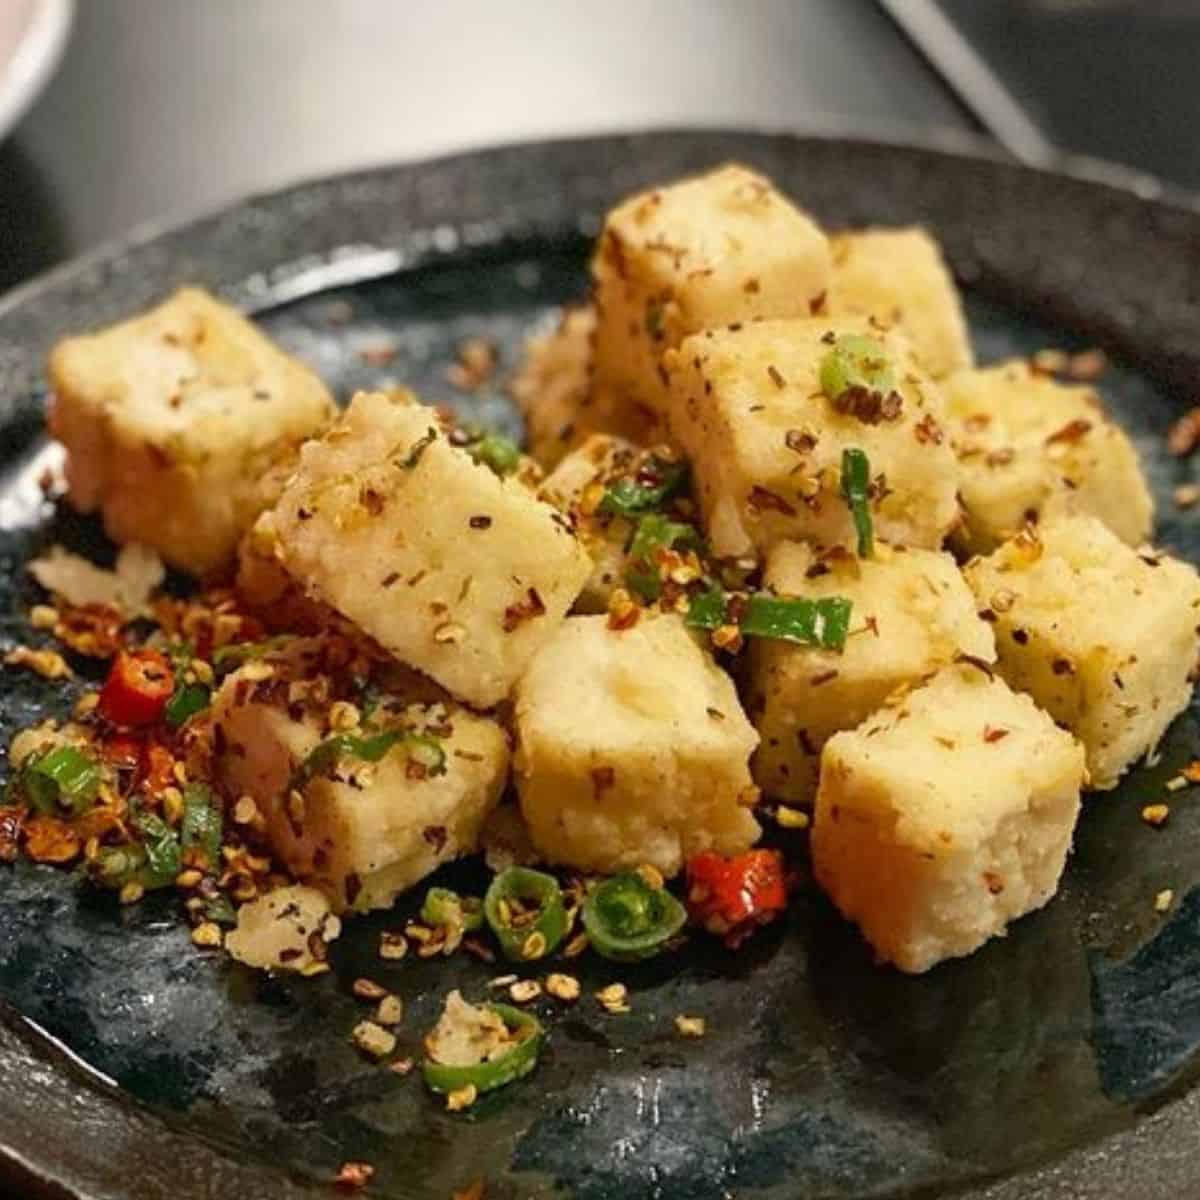 How many carbs are in deep fried tofu?